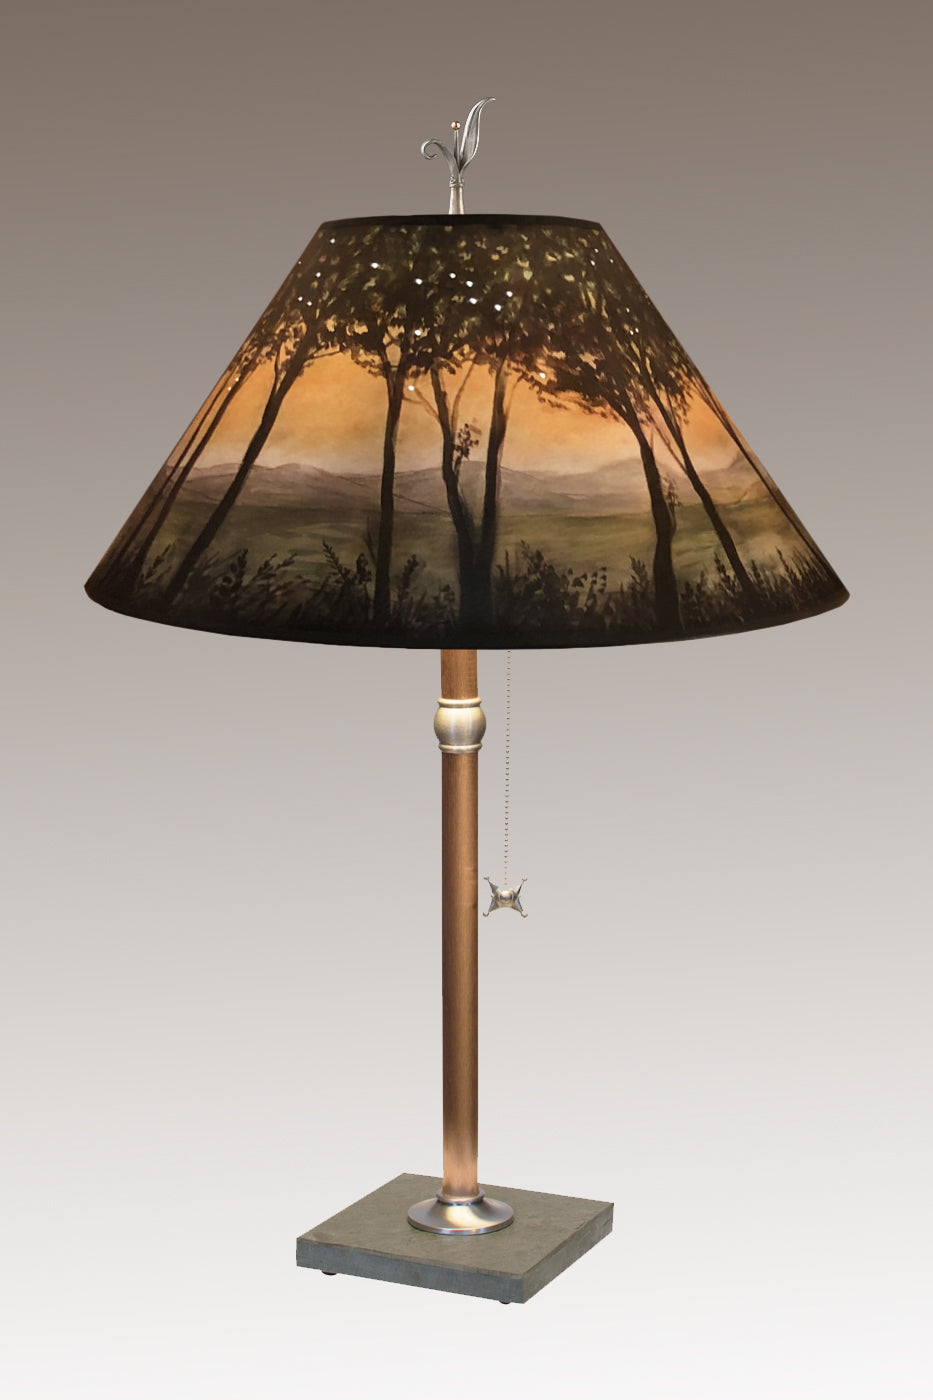 Janna Ugone &amp; Co Table Lamps Copper Table Lamp with Large Conical Shade in Dawn